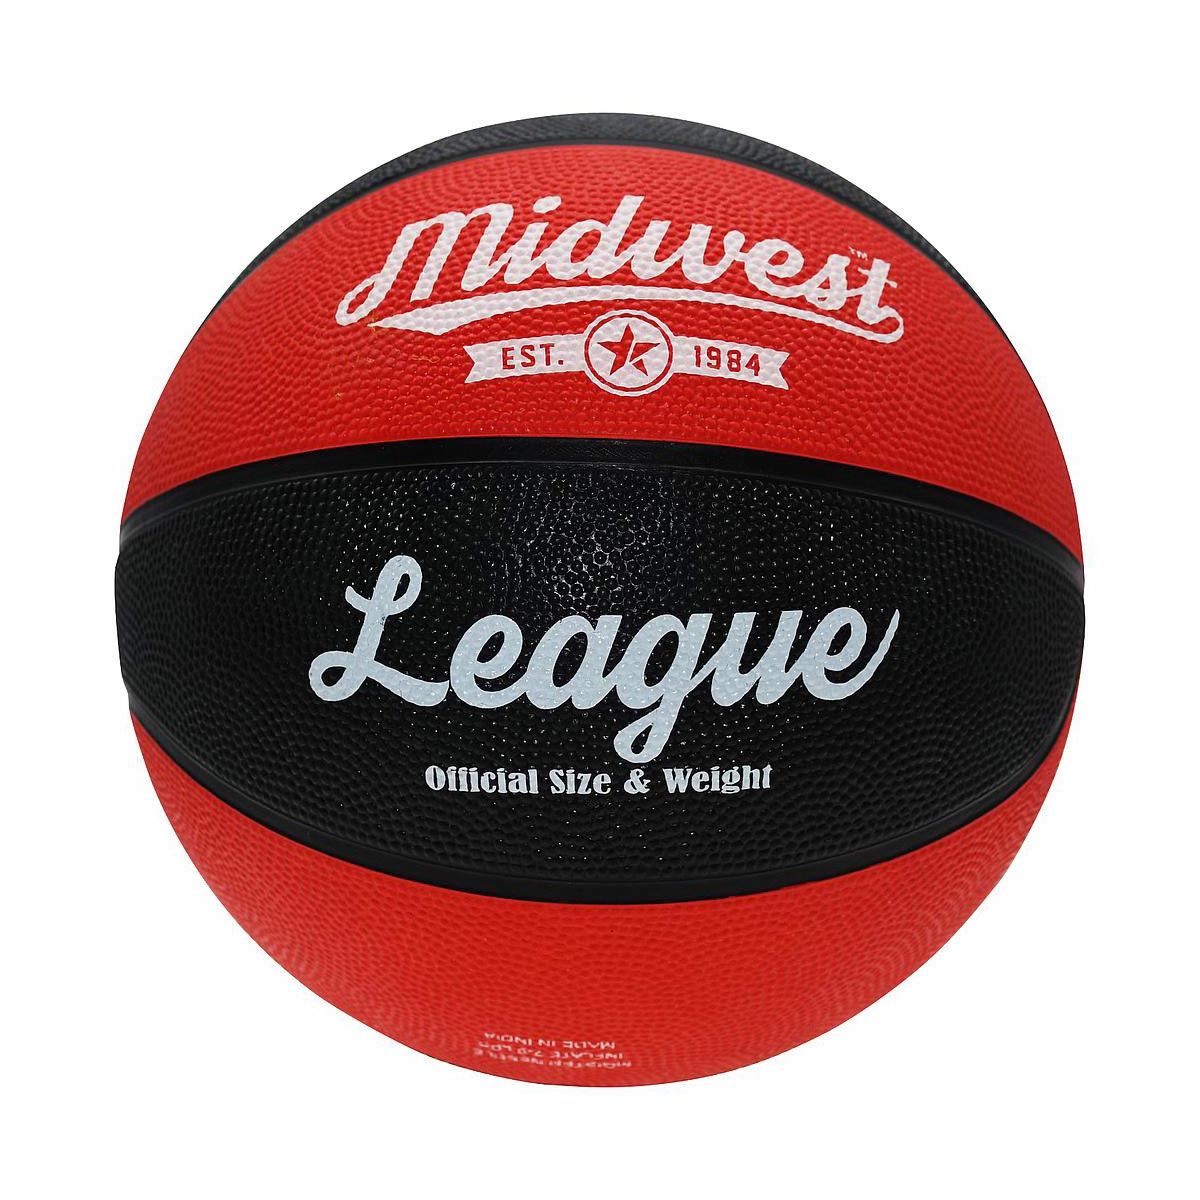 MIDWEST LEAGUE BASKETBALL SIZE 3